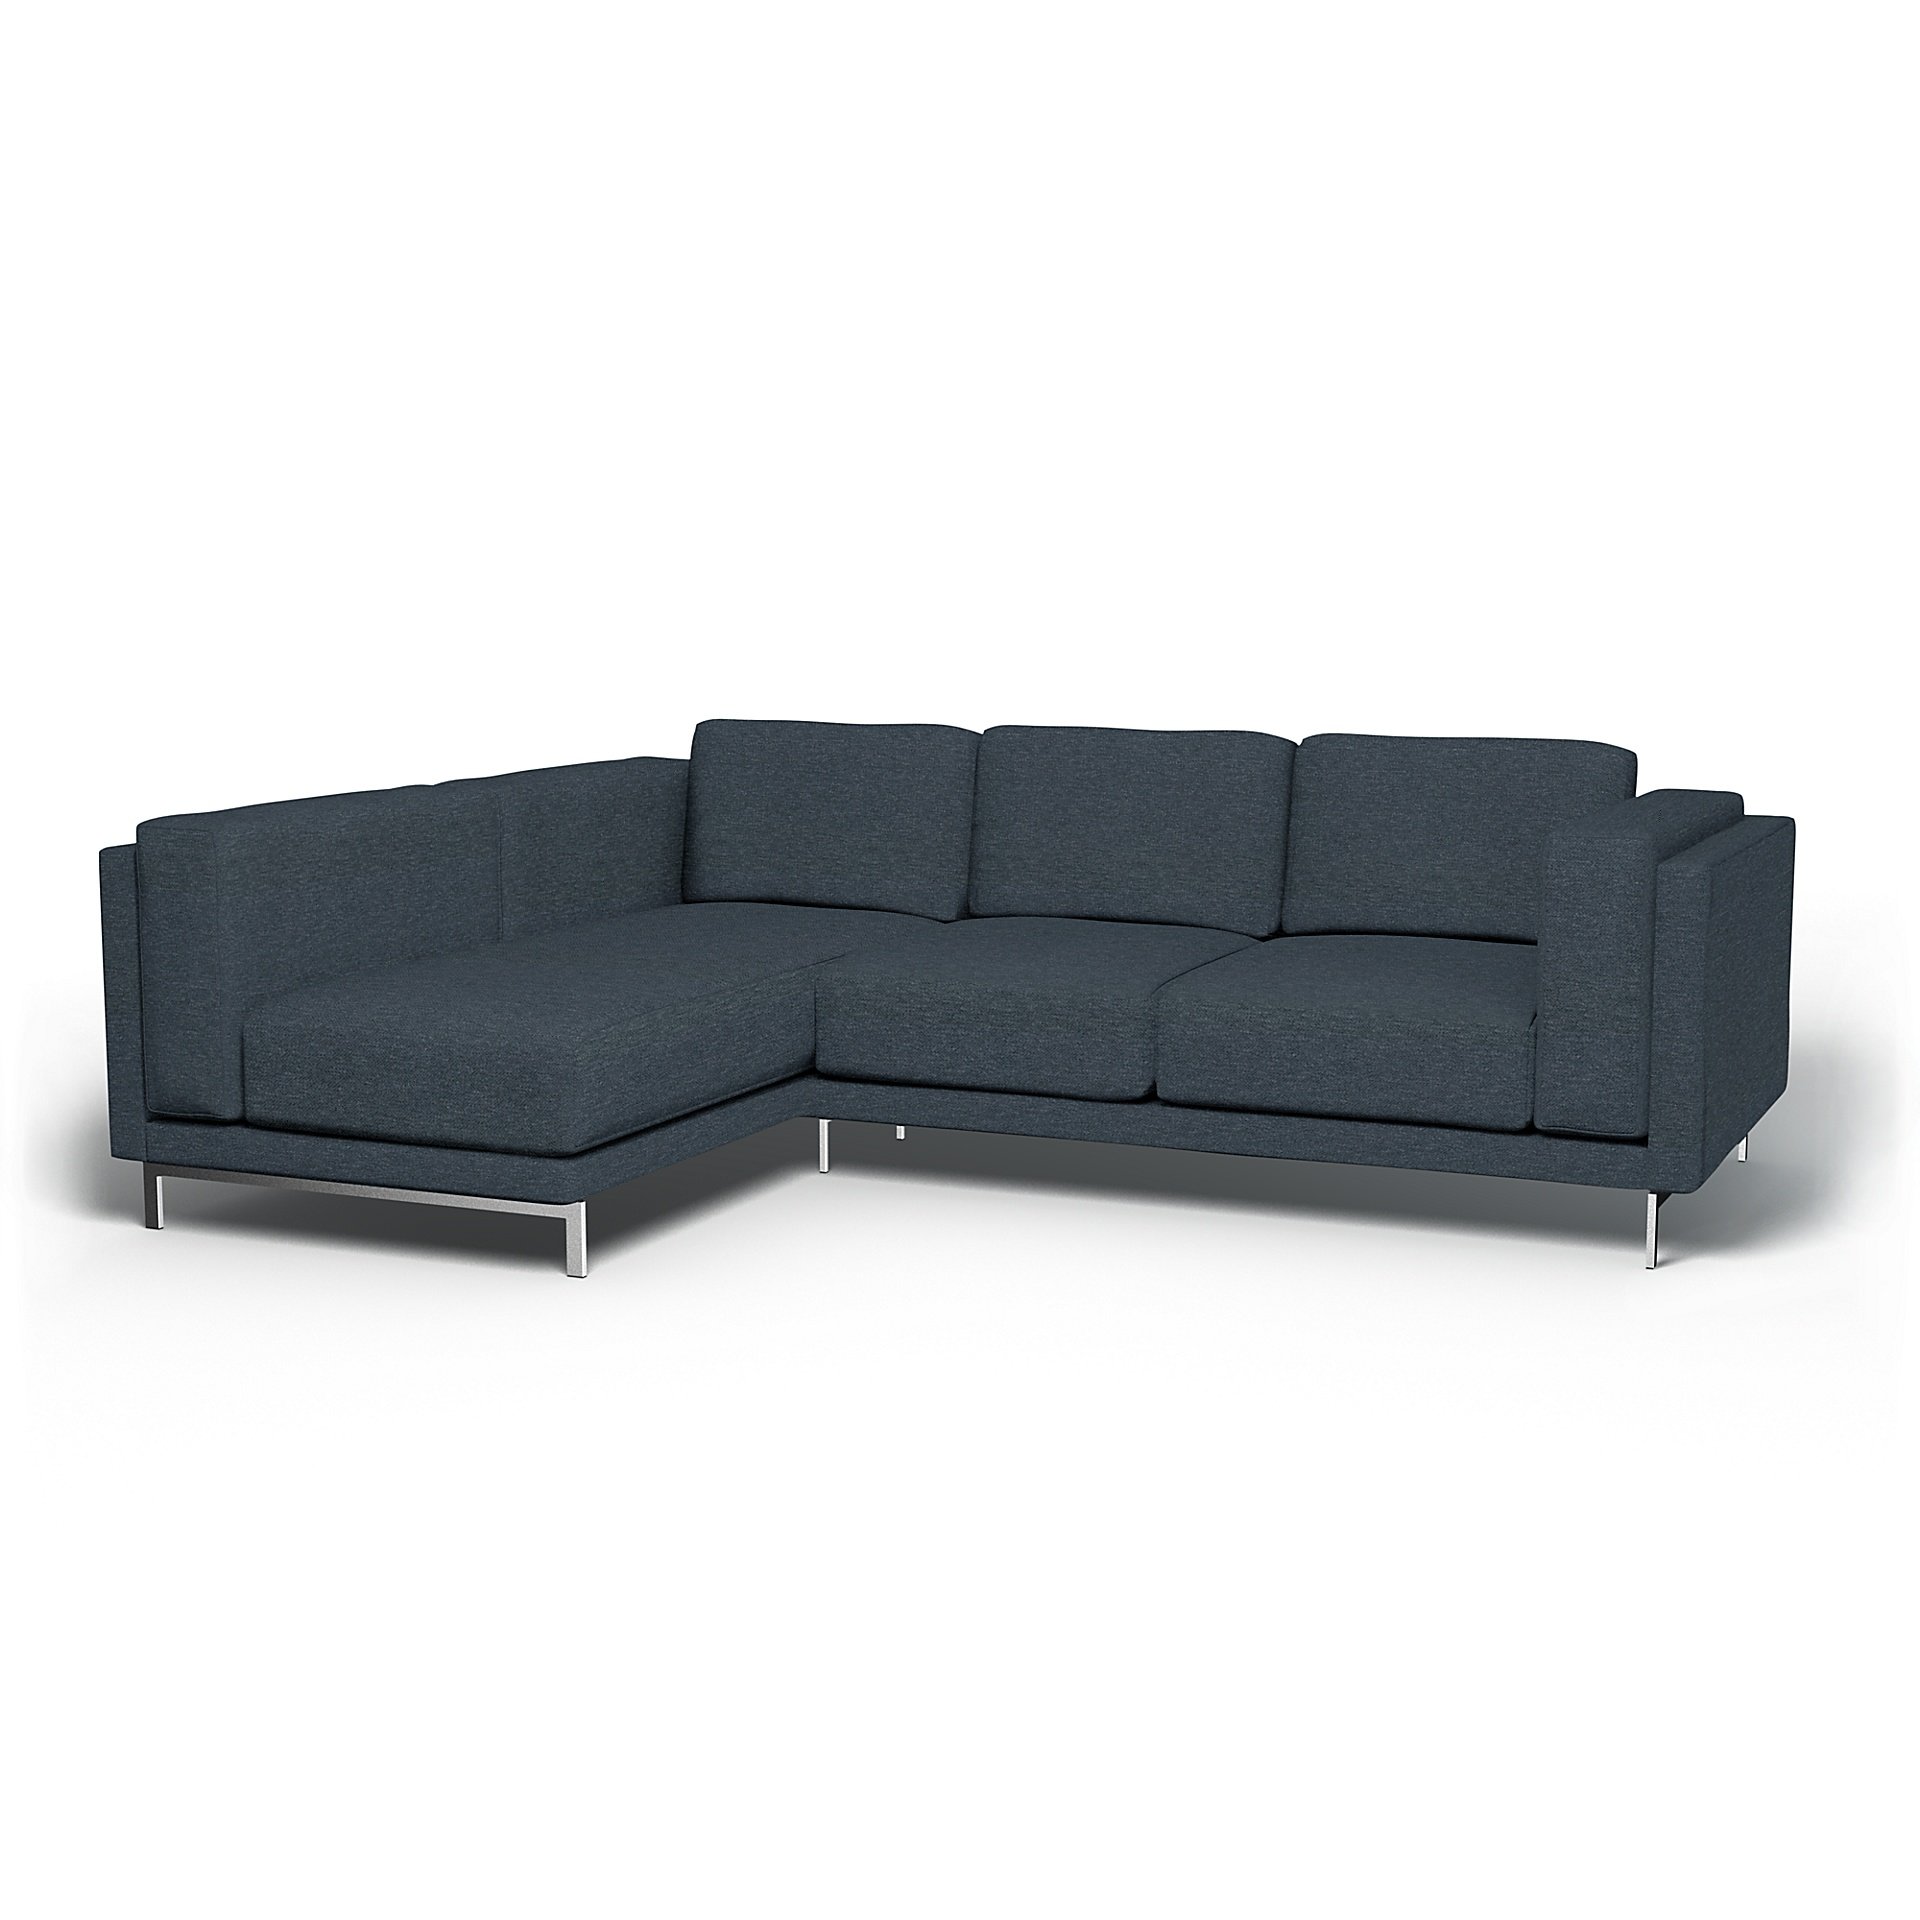 IKEA - Nockeby 3 Seater Sofa with Left Chaise Cover, Denim, Boucle & Texture - Bemz